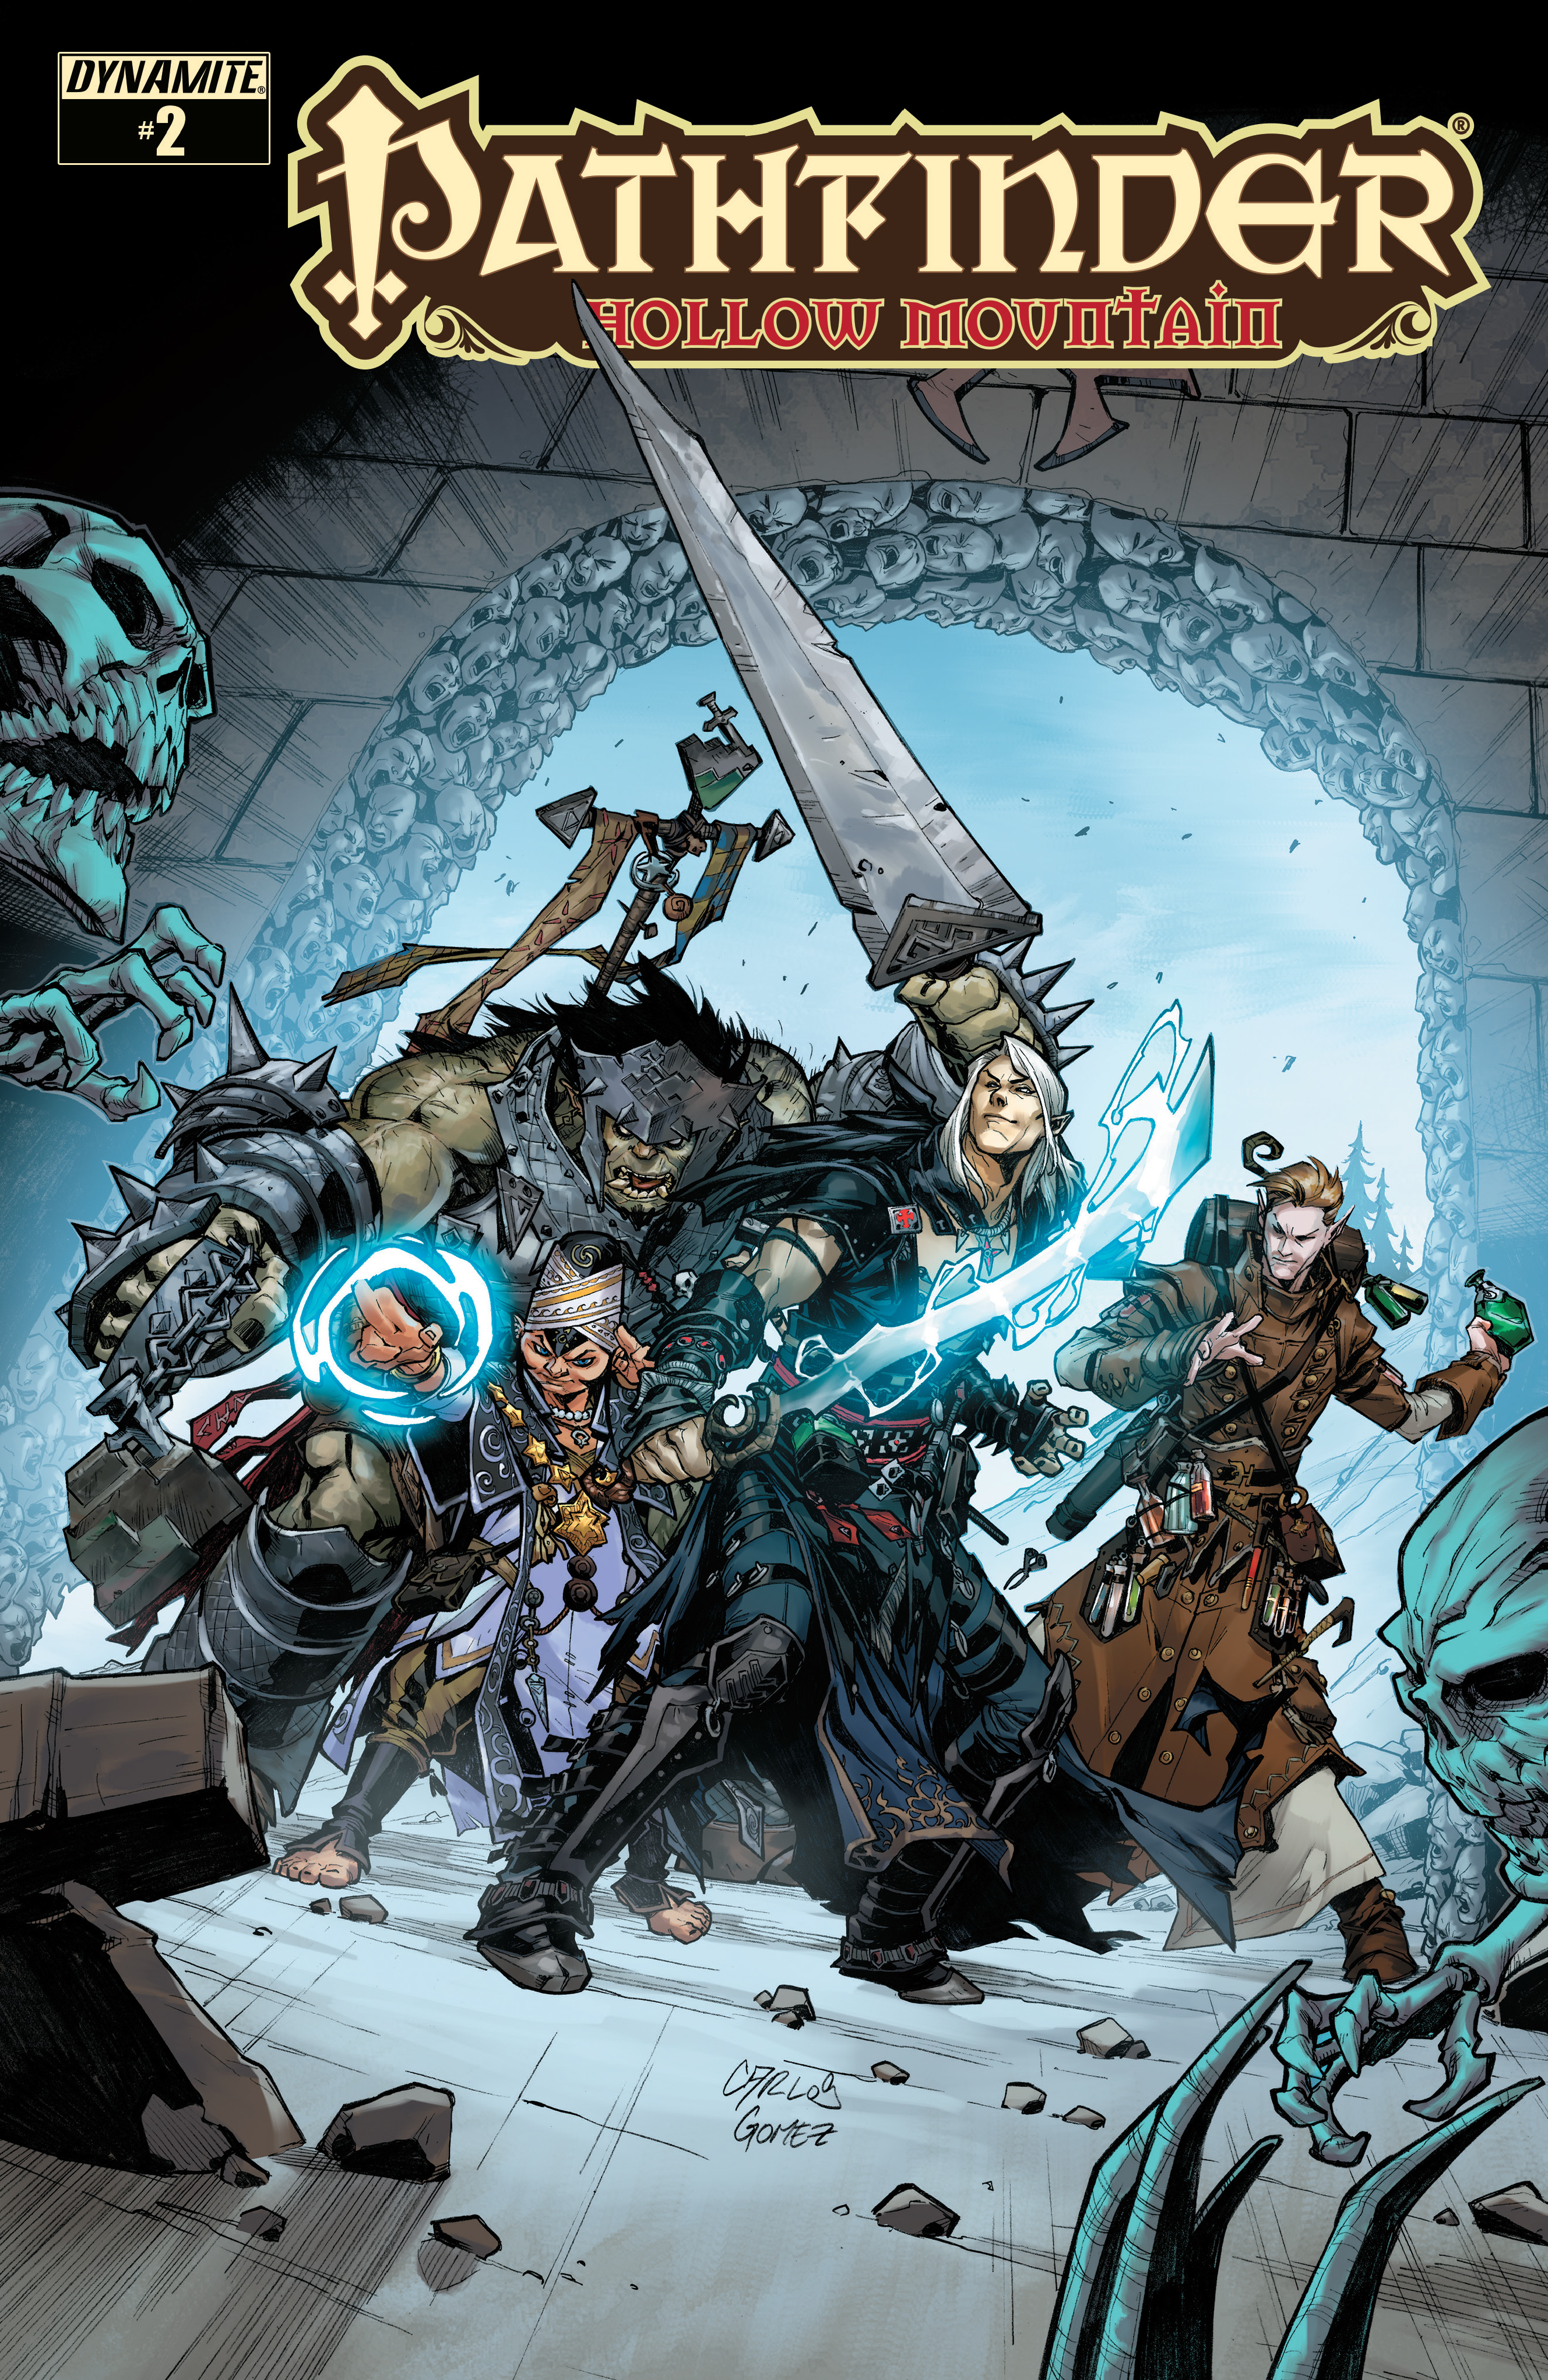 Read online Pathfinder: Hollow Mountain comic -  Issue #2 - 2